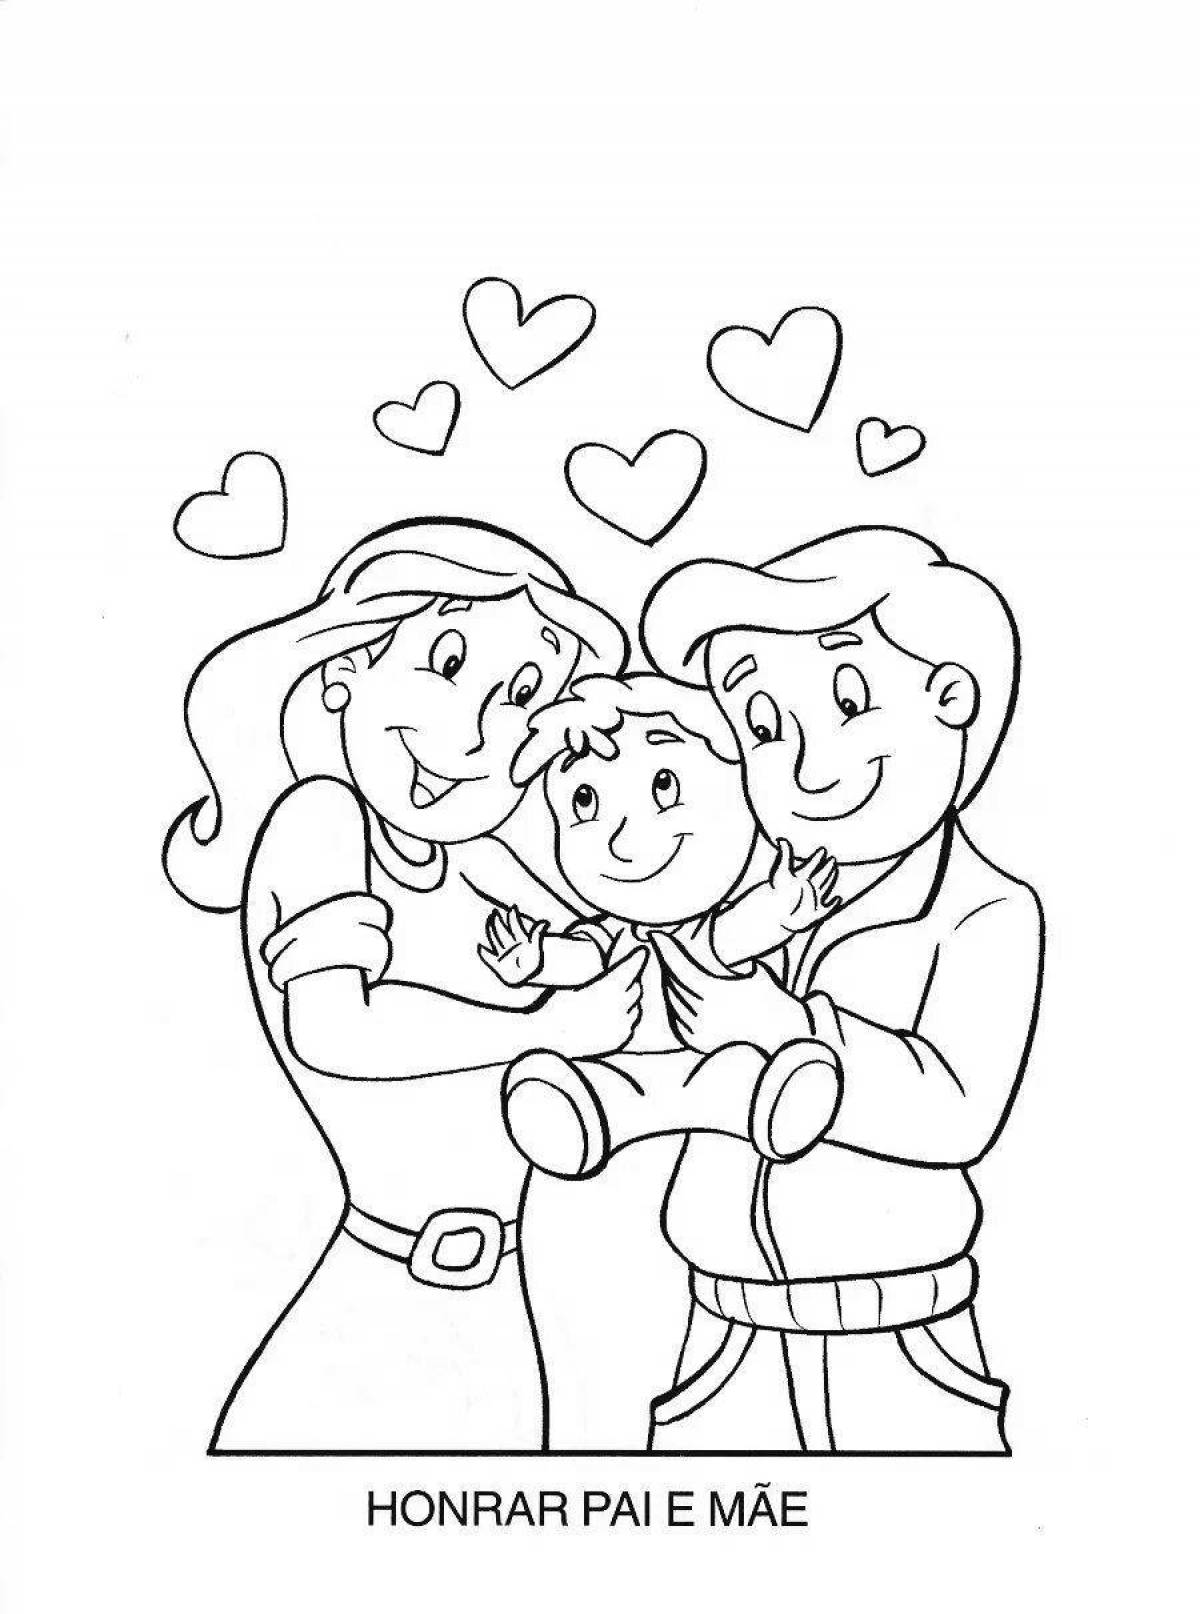 Inspiring coloring day of family love and fidelity